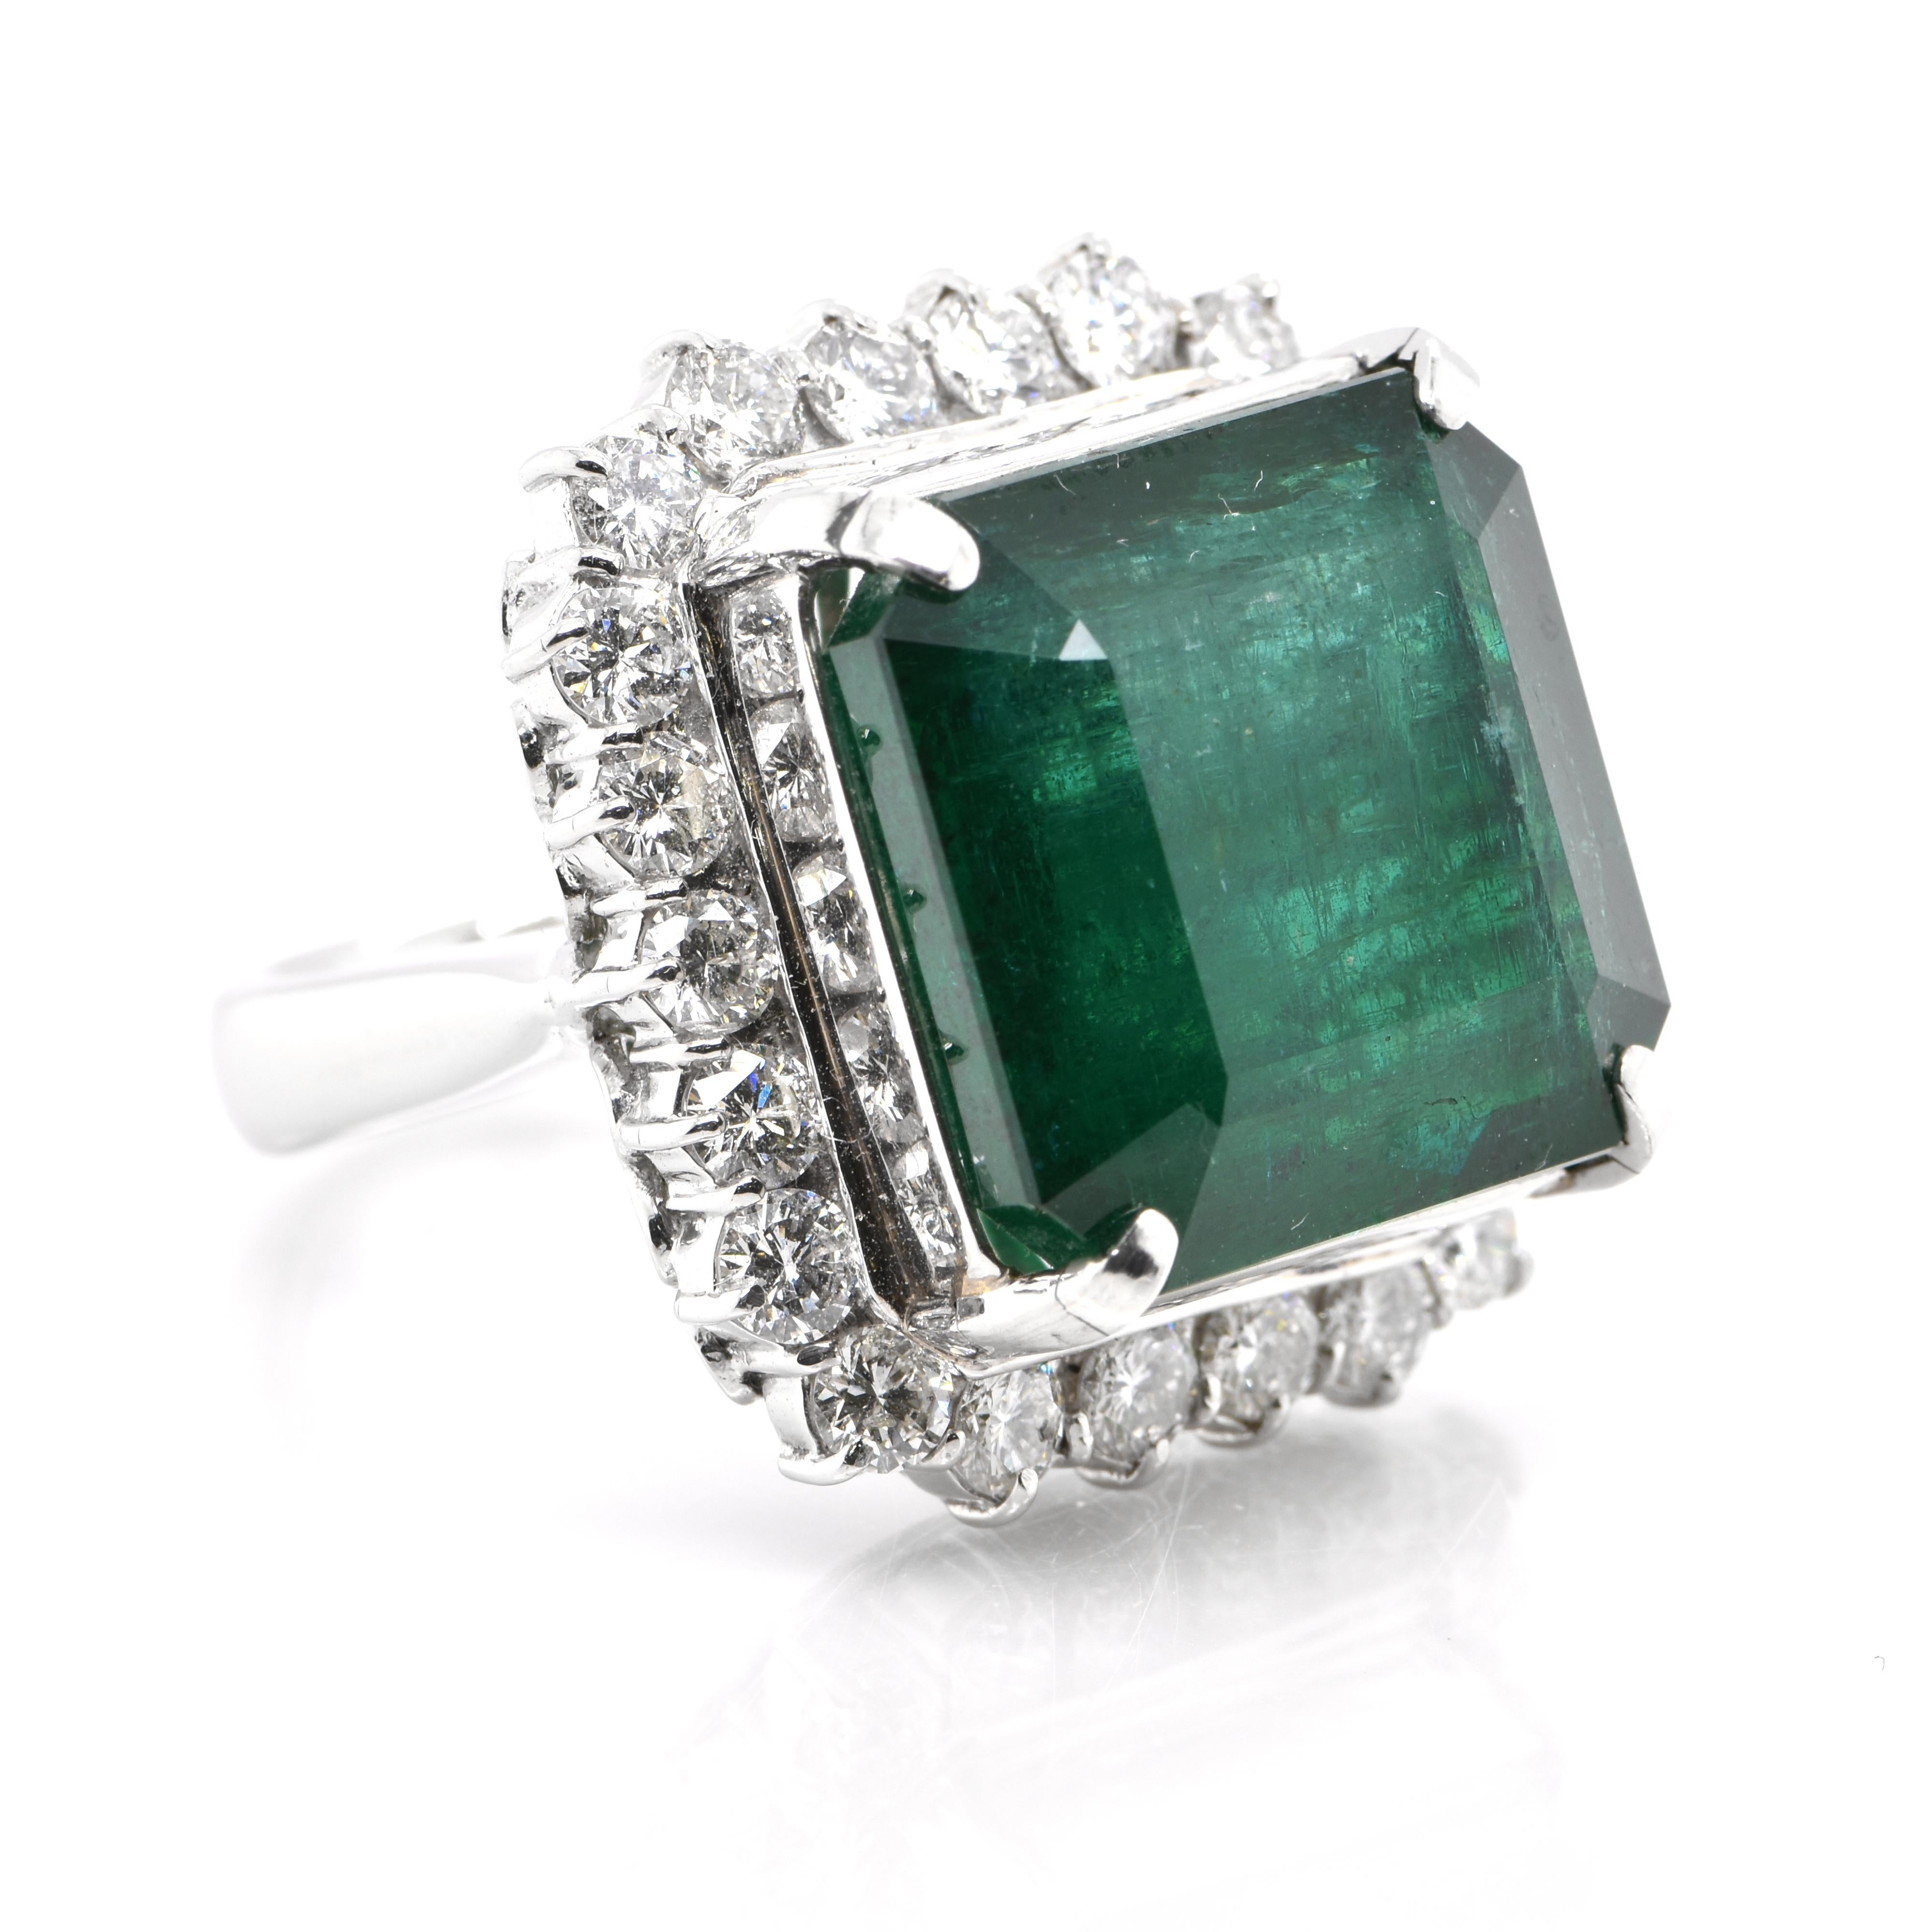 A stunning cocktail halo ring featuring a 29.29 Carat Natural Emerald and 2.81 Carats of Diamond Accents set in Platinum. People have admired emerald’s green for thousands of years. Emeralds have always been associated with the lushest landscapes